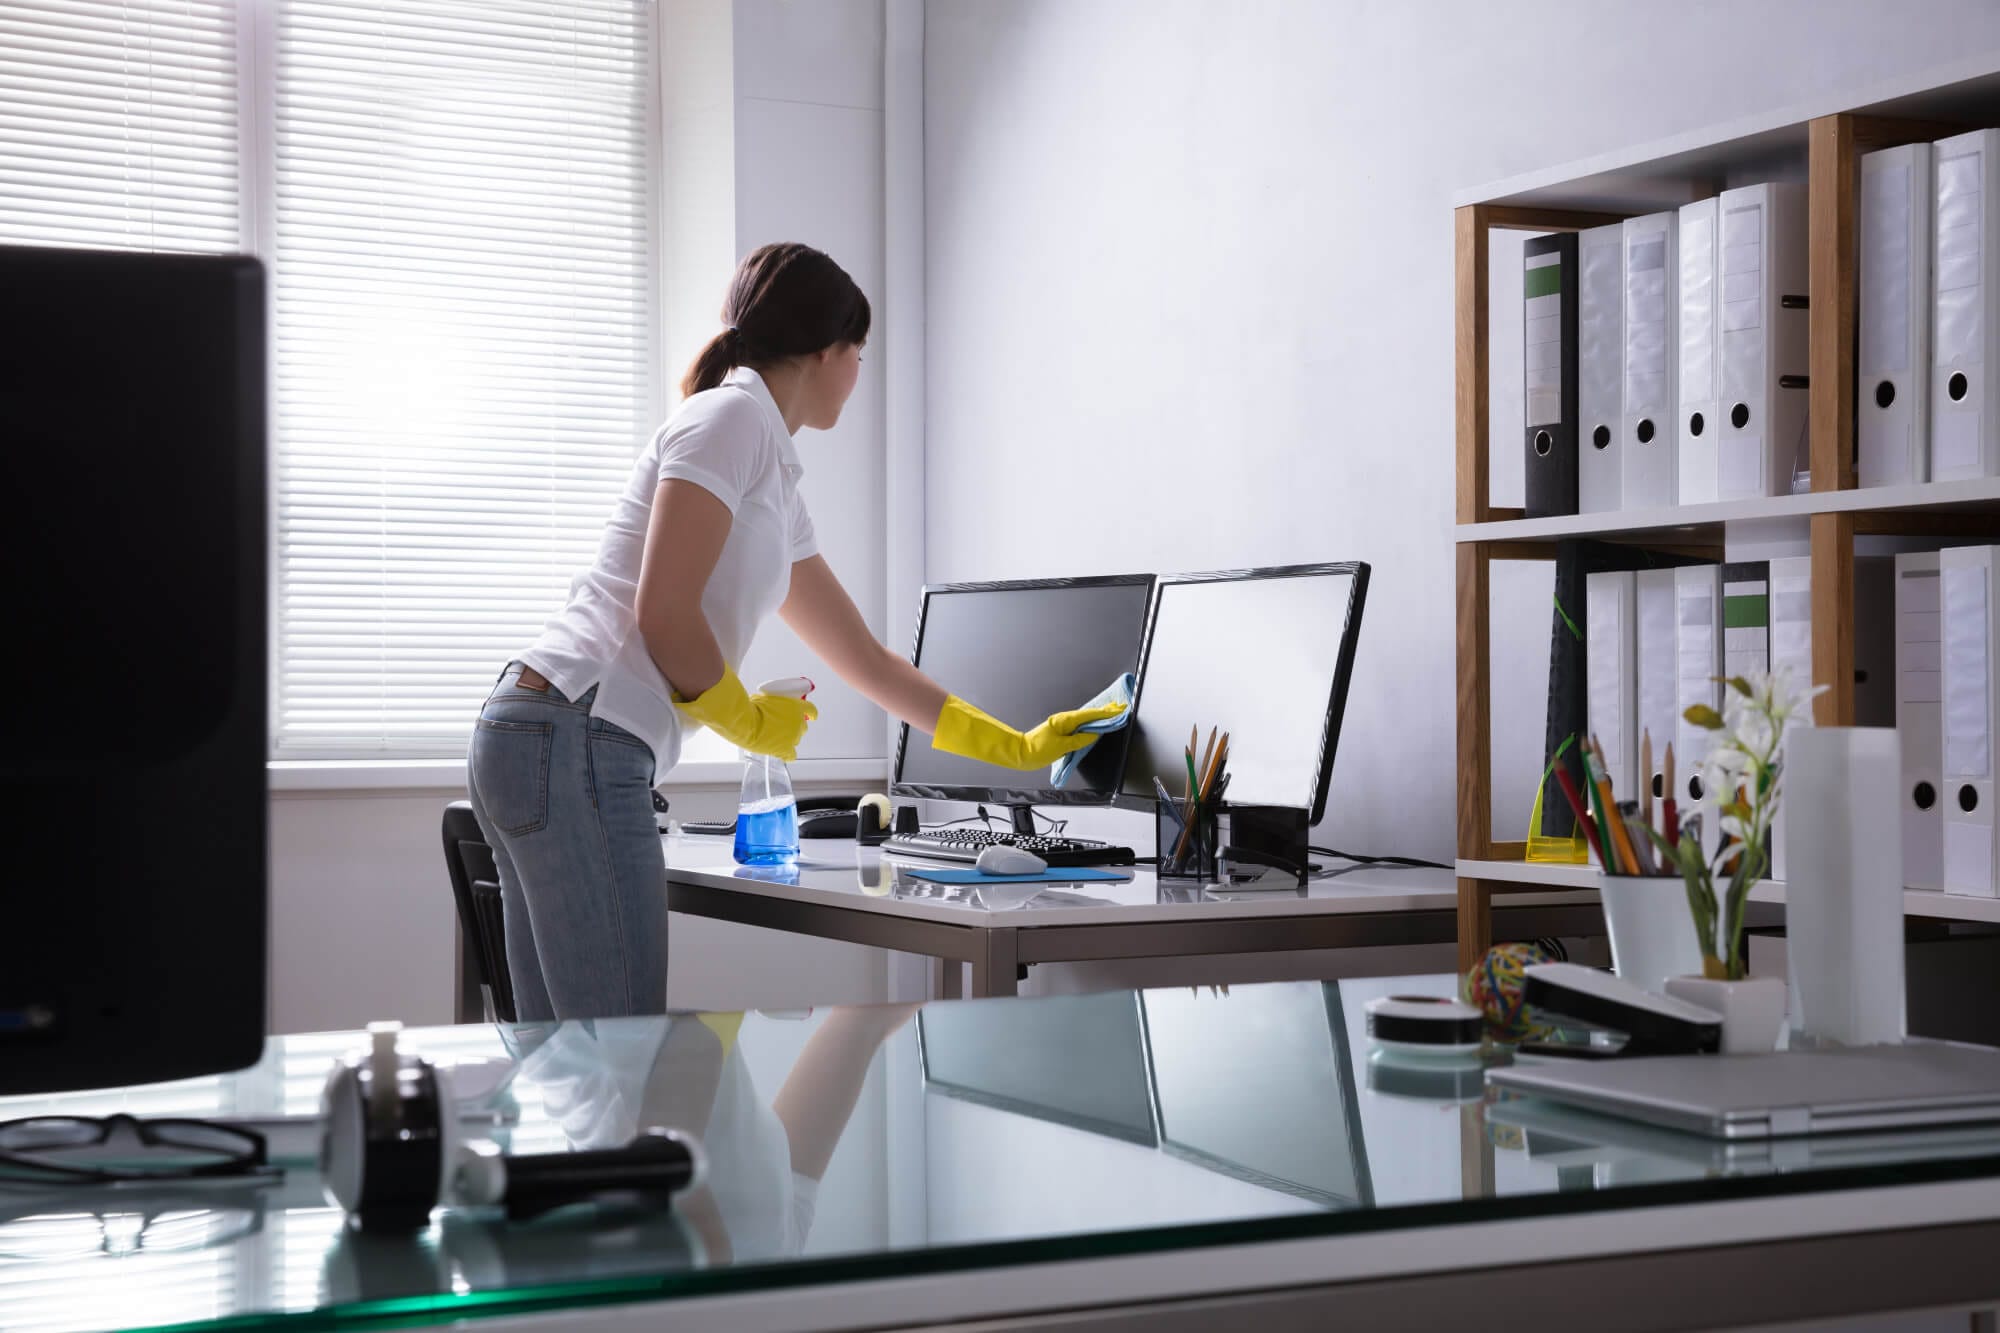 office cleaning tips and tricks